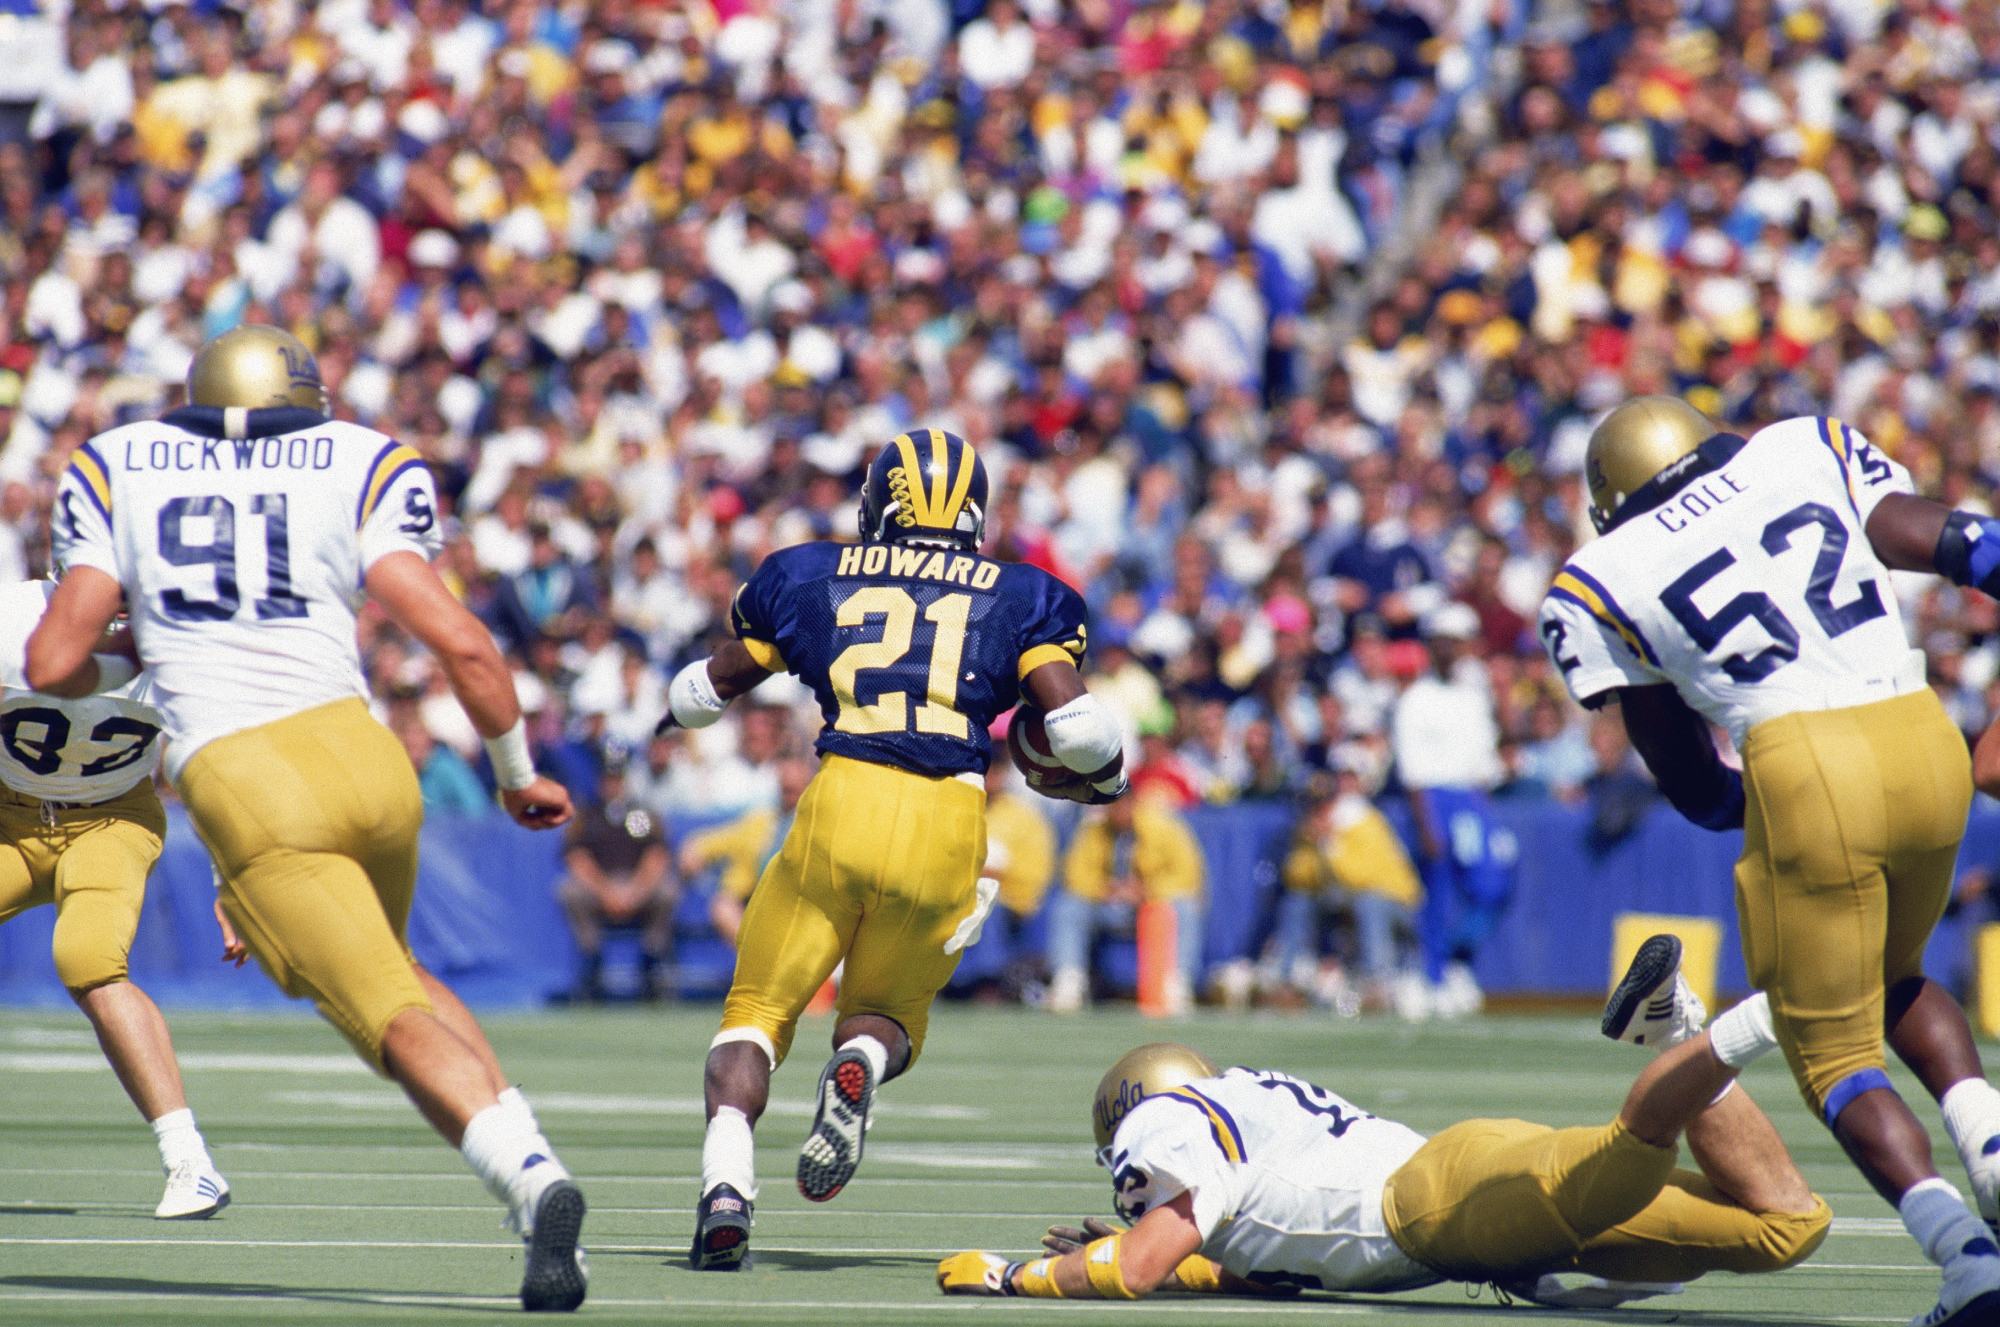 2000x1327 Desmond Howard again Nope that's Charles Woodson I can't read